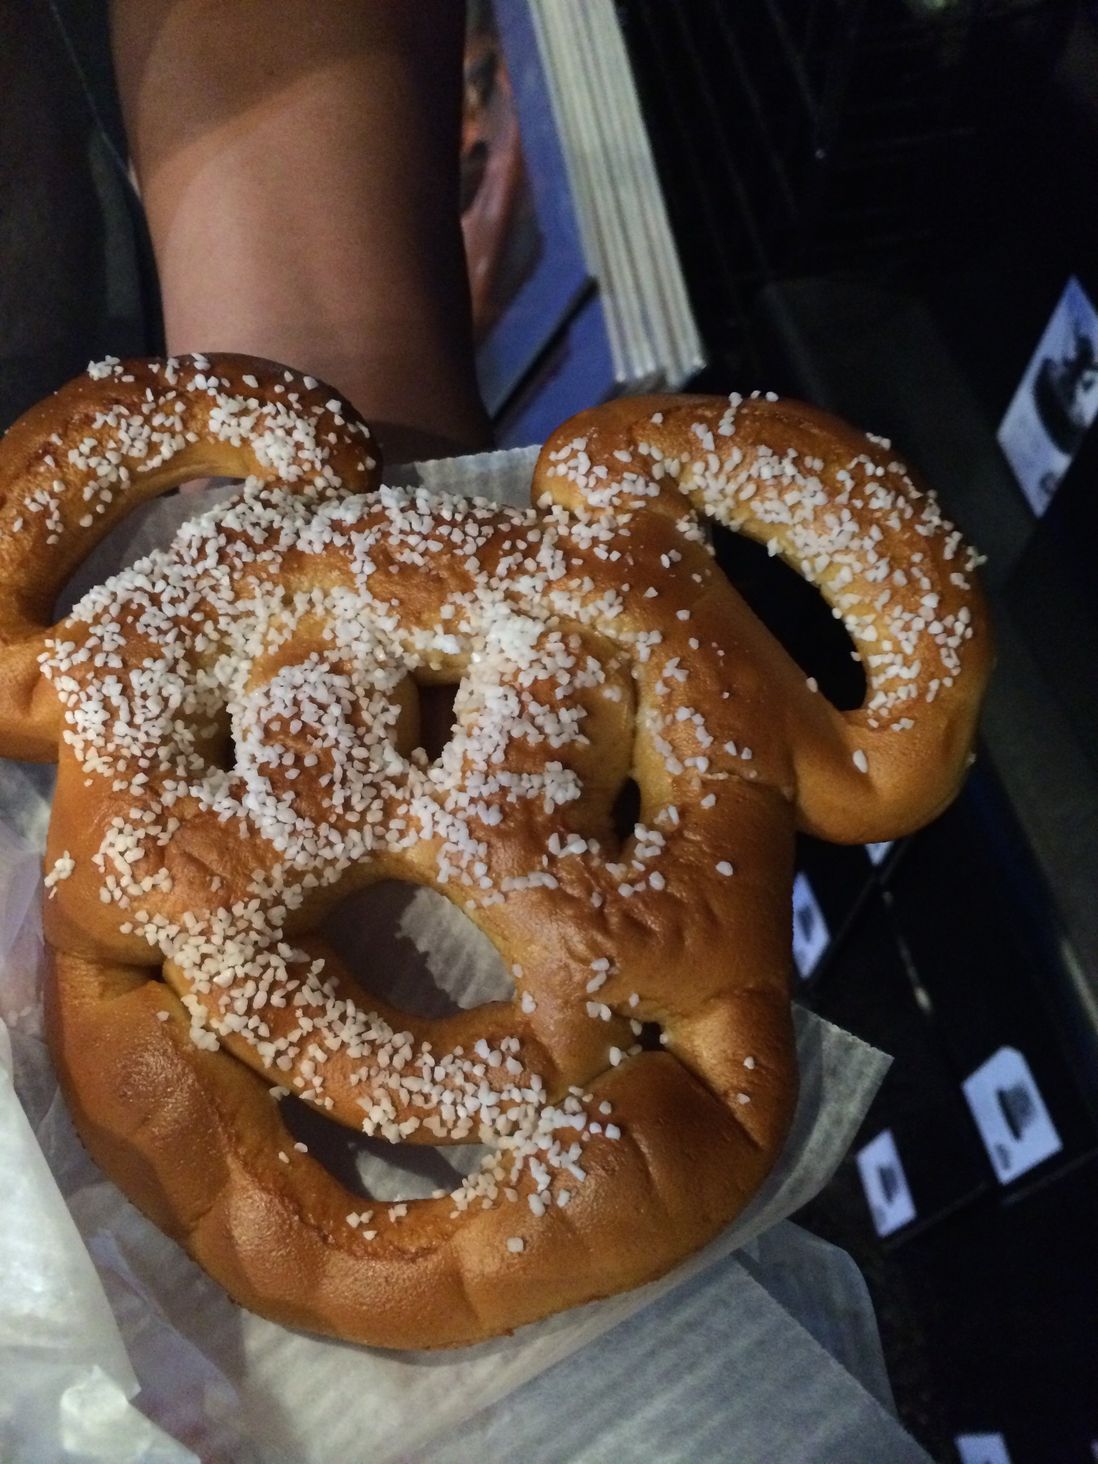 One of the most prized and filling snacks at Disneyworld is their Mickey-shaped soft pretzels that can be found throughout the park. Eat it with salt in its original form or dip it in cheese or chocolate sauce. <br/>